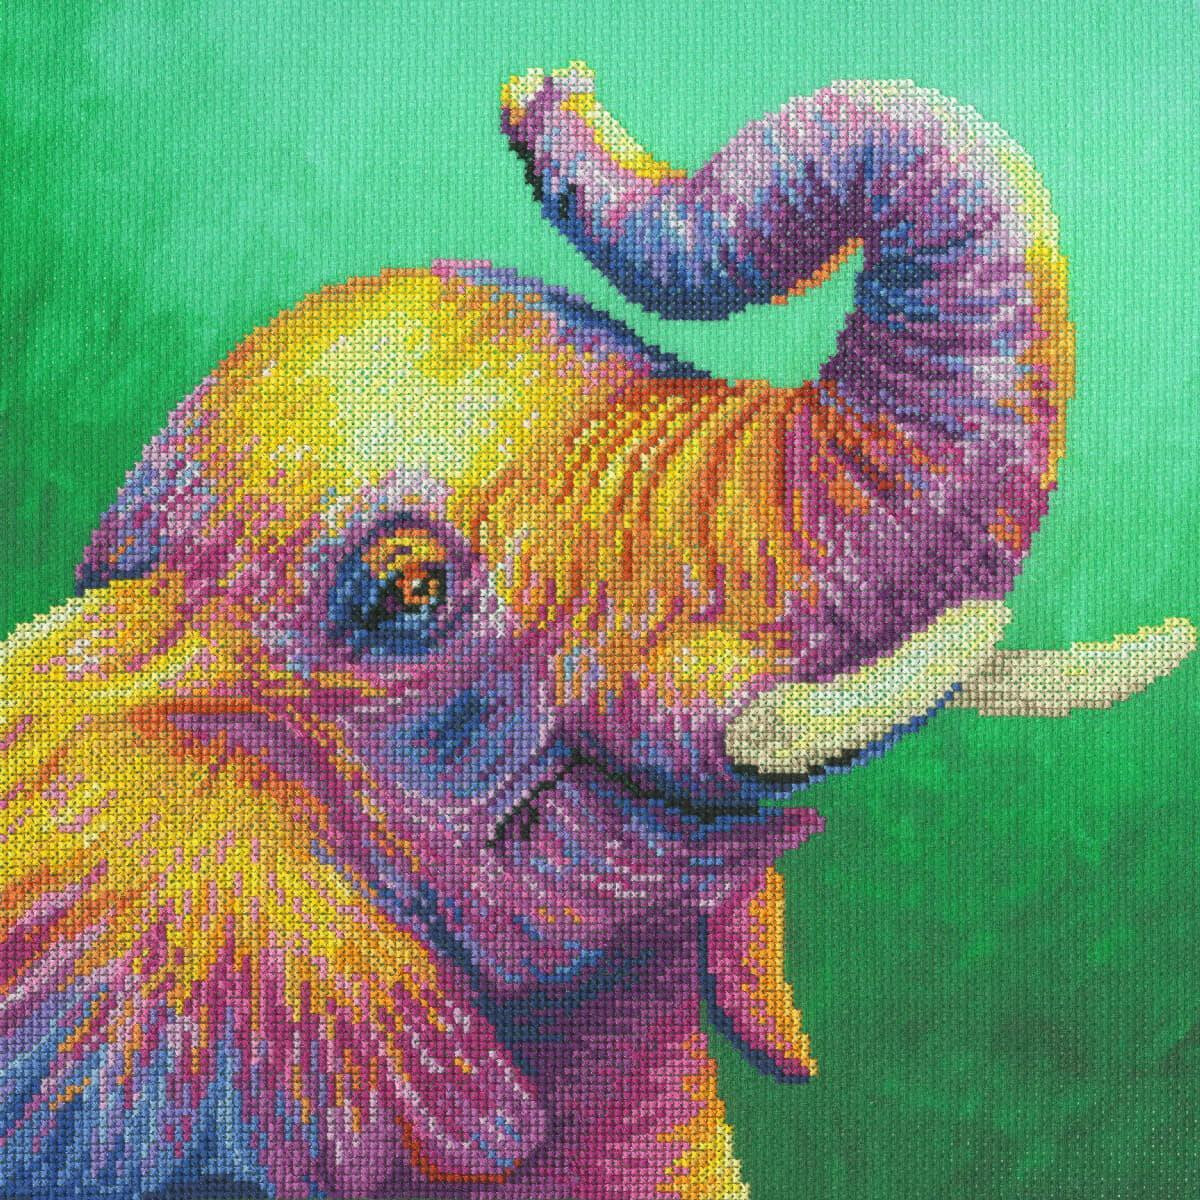 A colorful, pixelated image of an elephant with an...